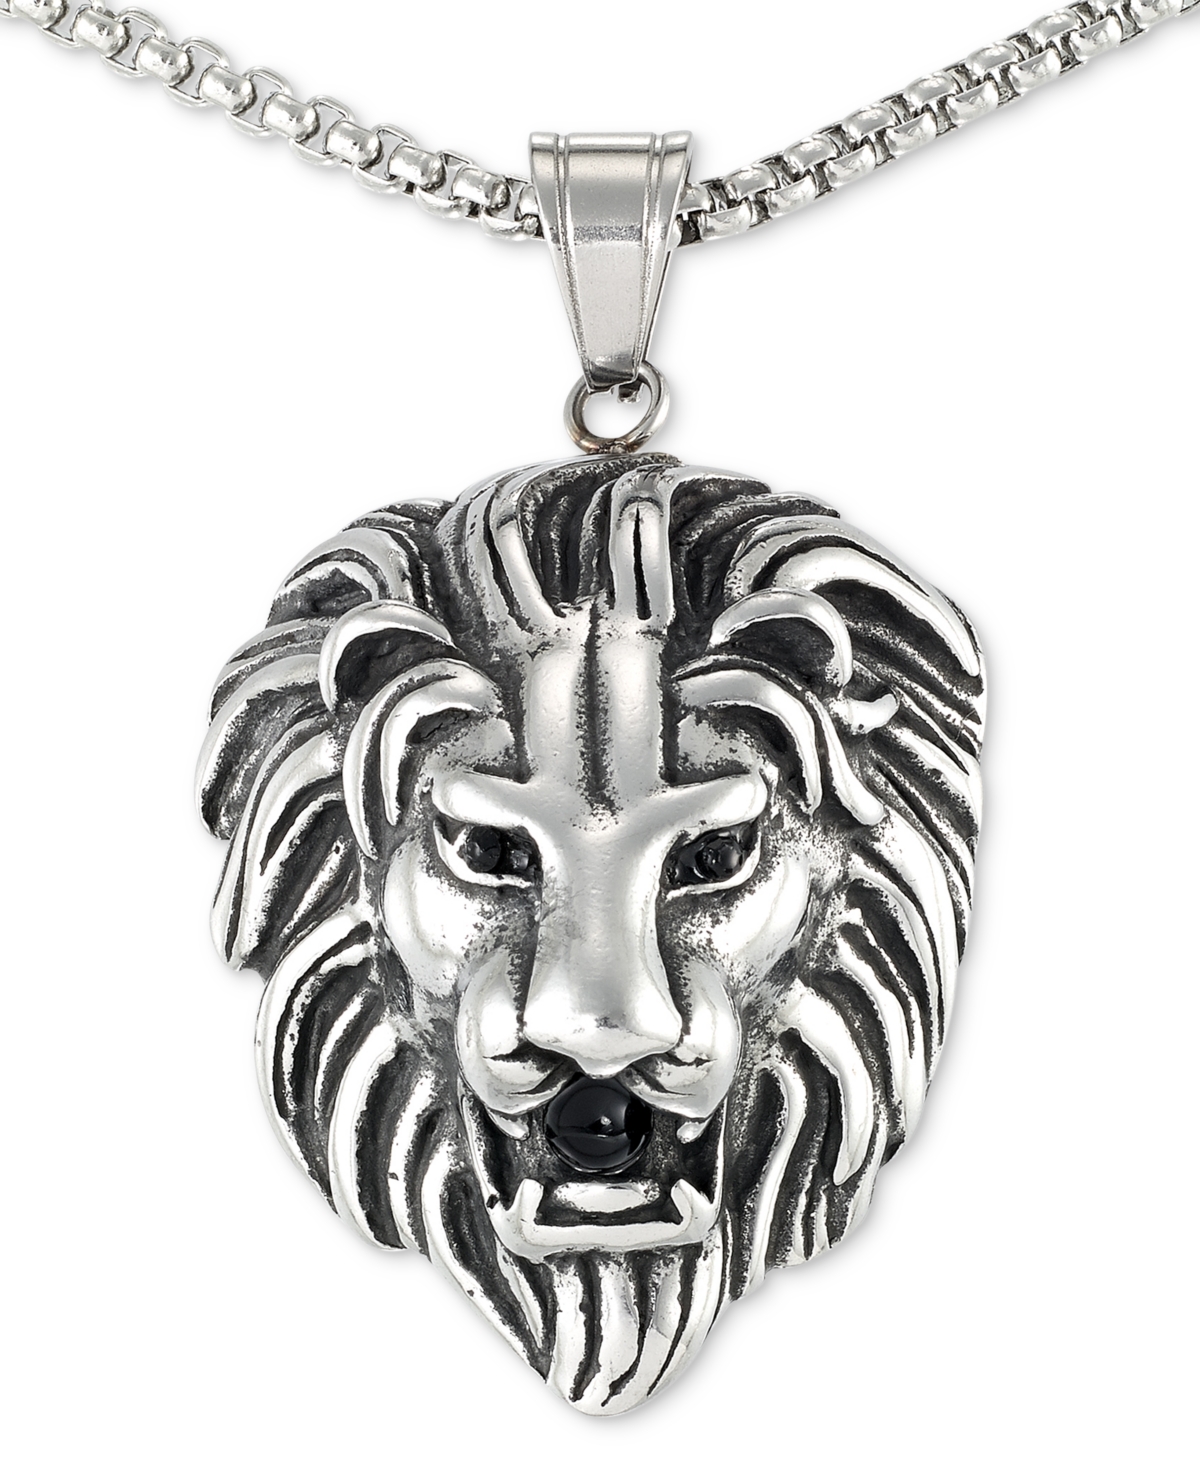 Smith Black Agate Lion Head 24" Pendant Necklace in Stainless Steel - Stainless Steel